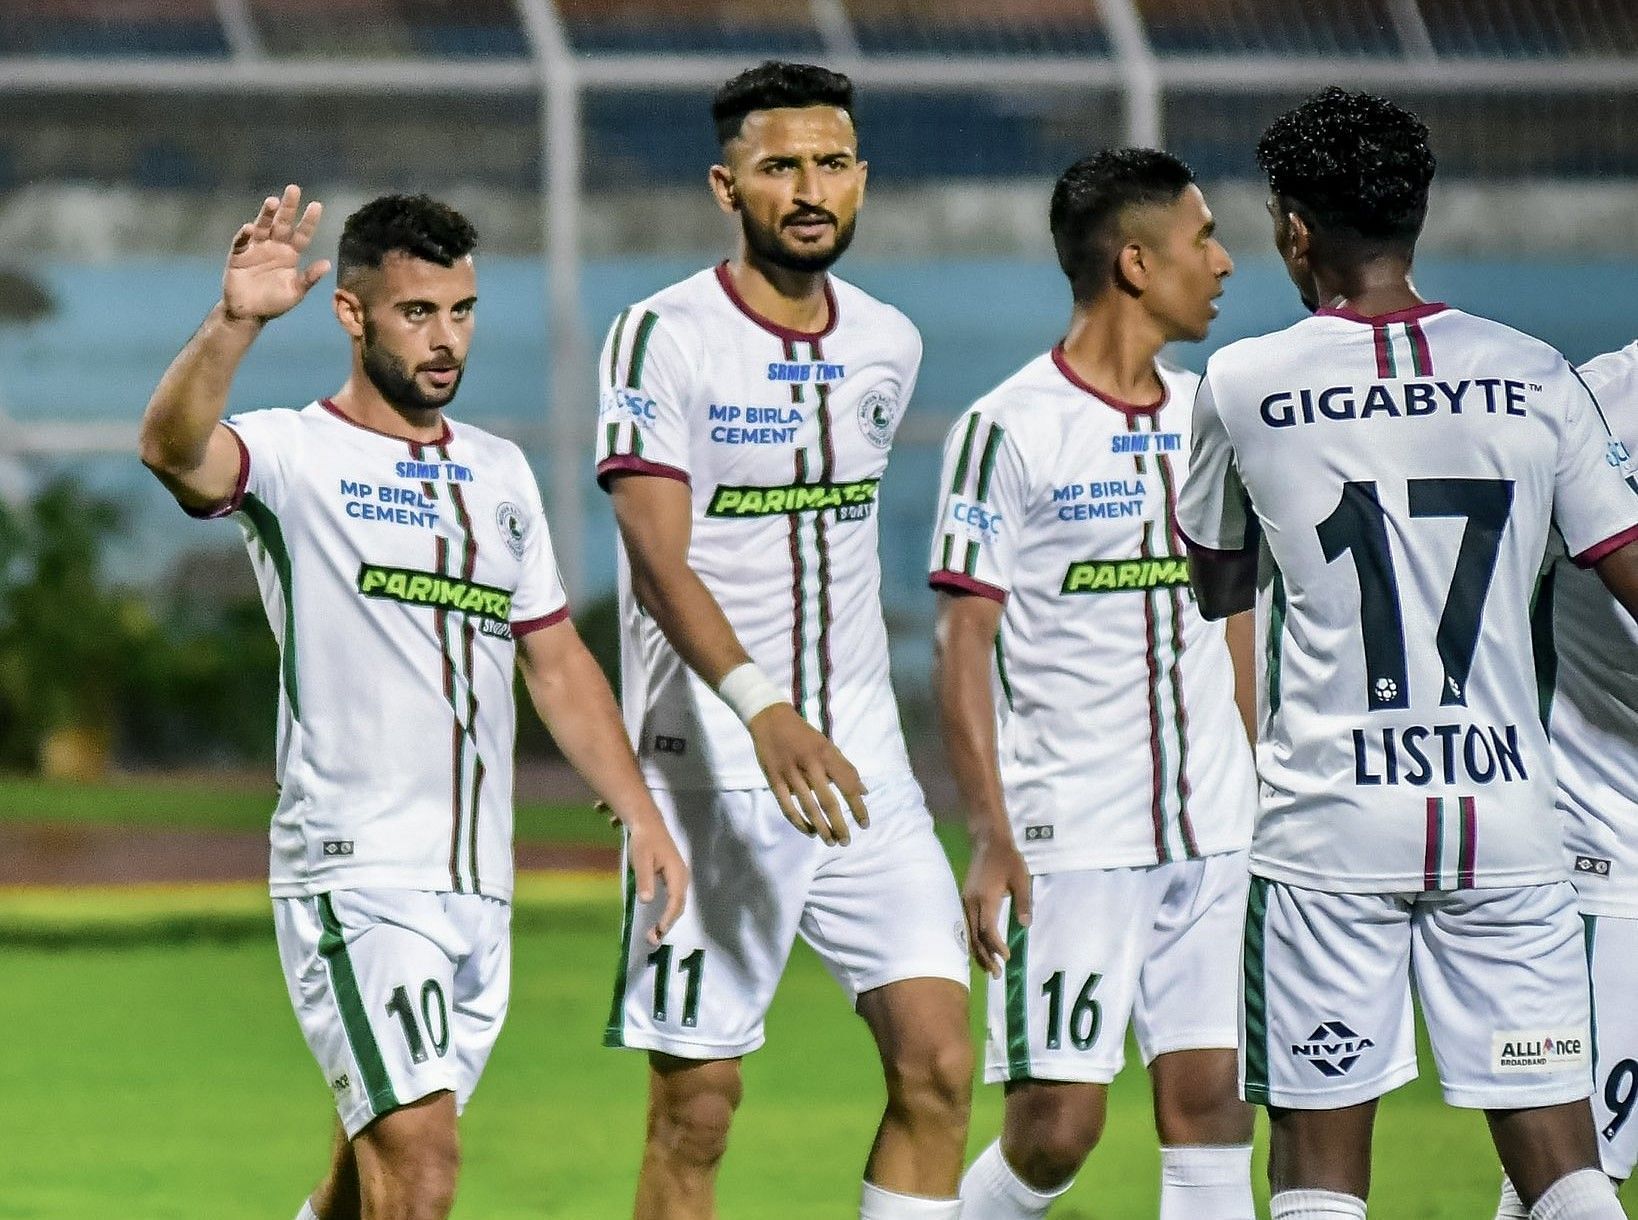 Mohun Bagan SG now have six points from their two matches.